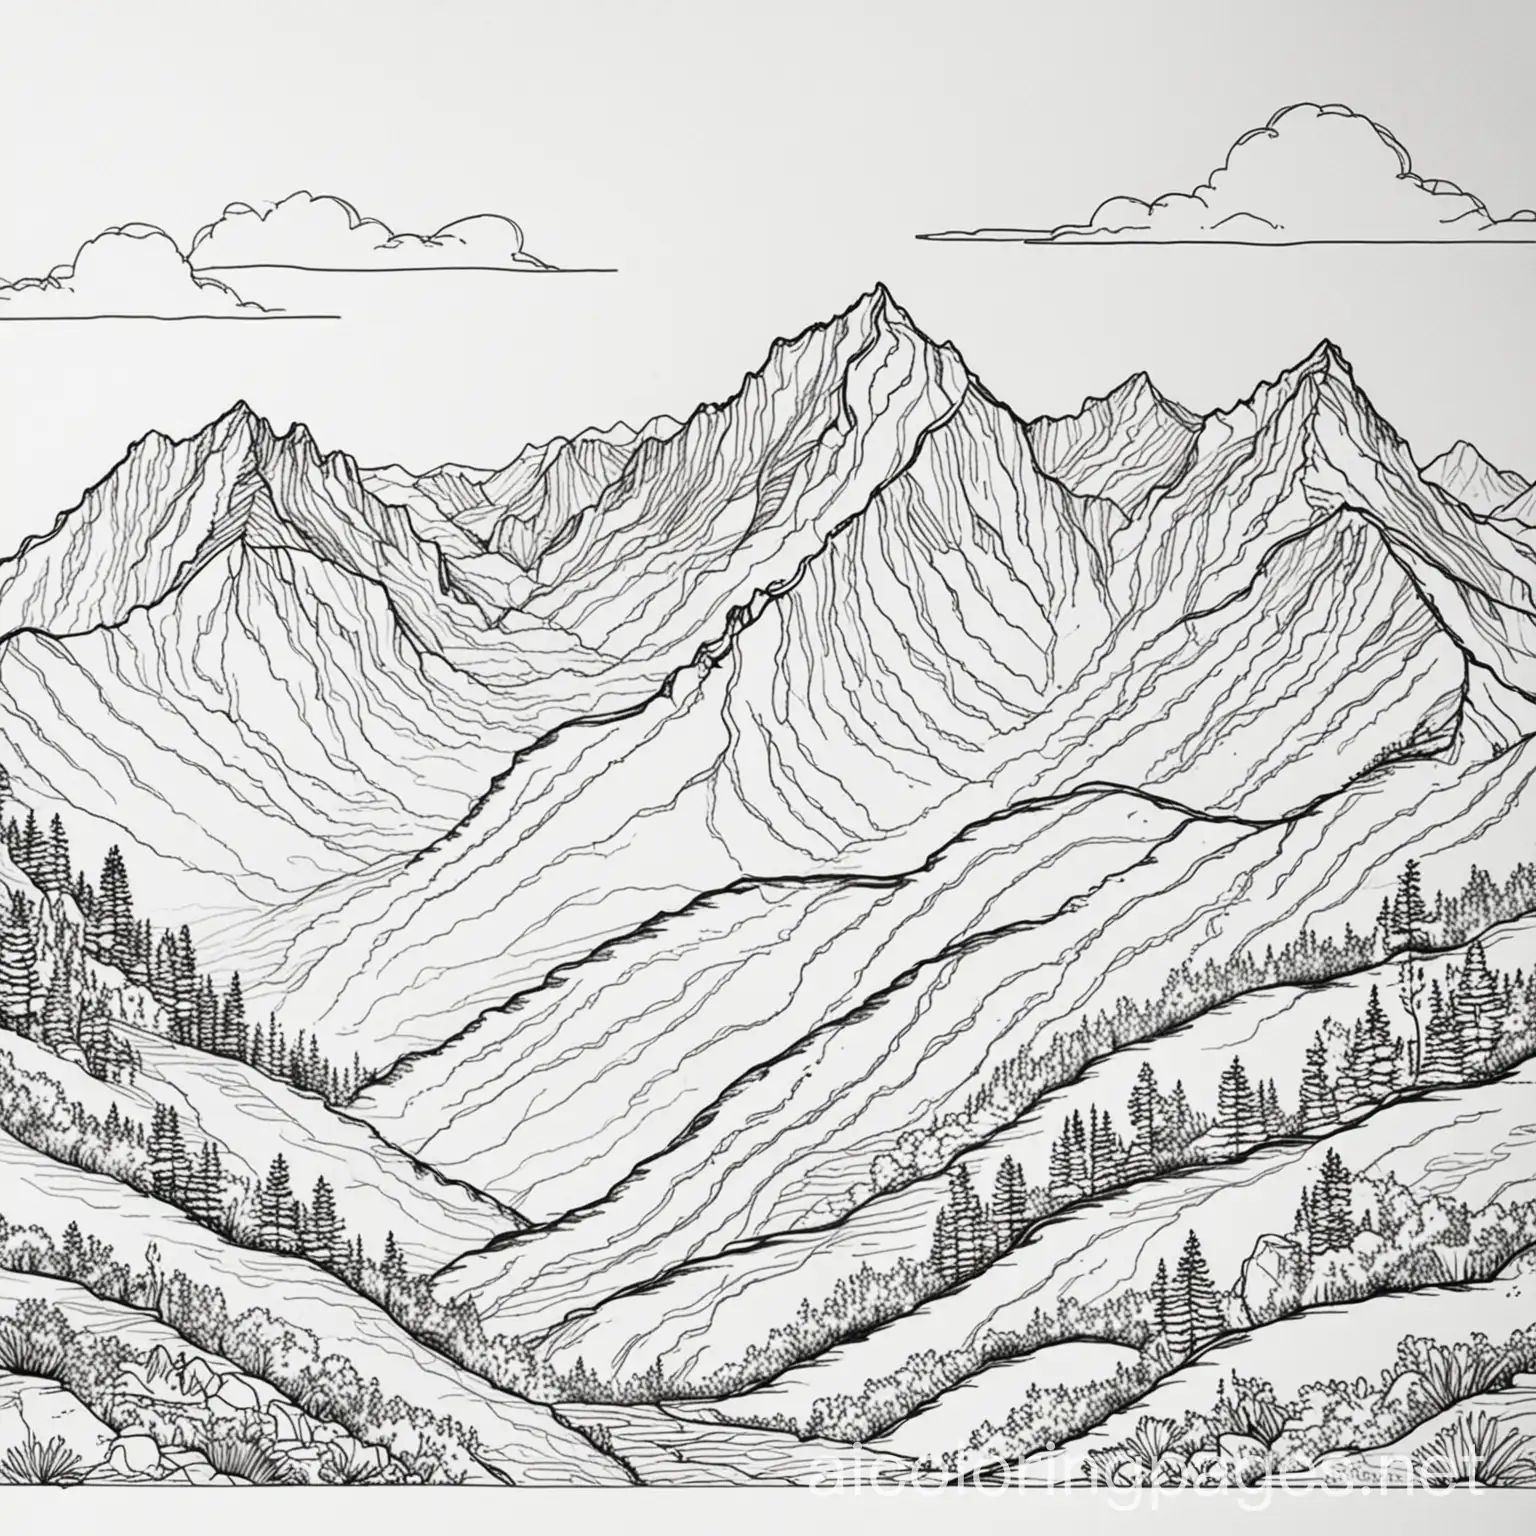 mountains, Coloring Page, black and white, line art, white background, Simplicity, Ample White Space. The background of the coloring page is plain white to make it easy for young children to color within the lines. The outlines of all the subjects are easy to distinguish, making it simple for kids to color without too much difficulty